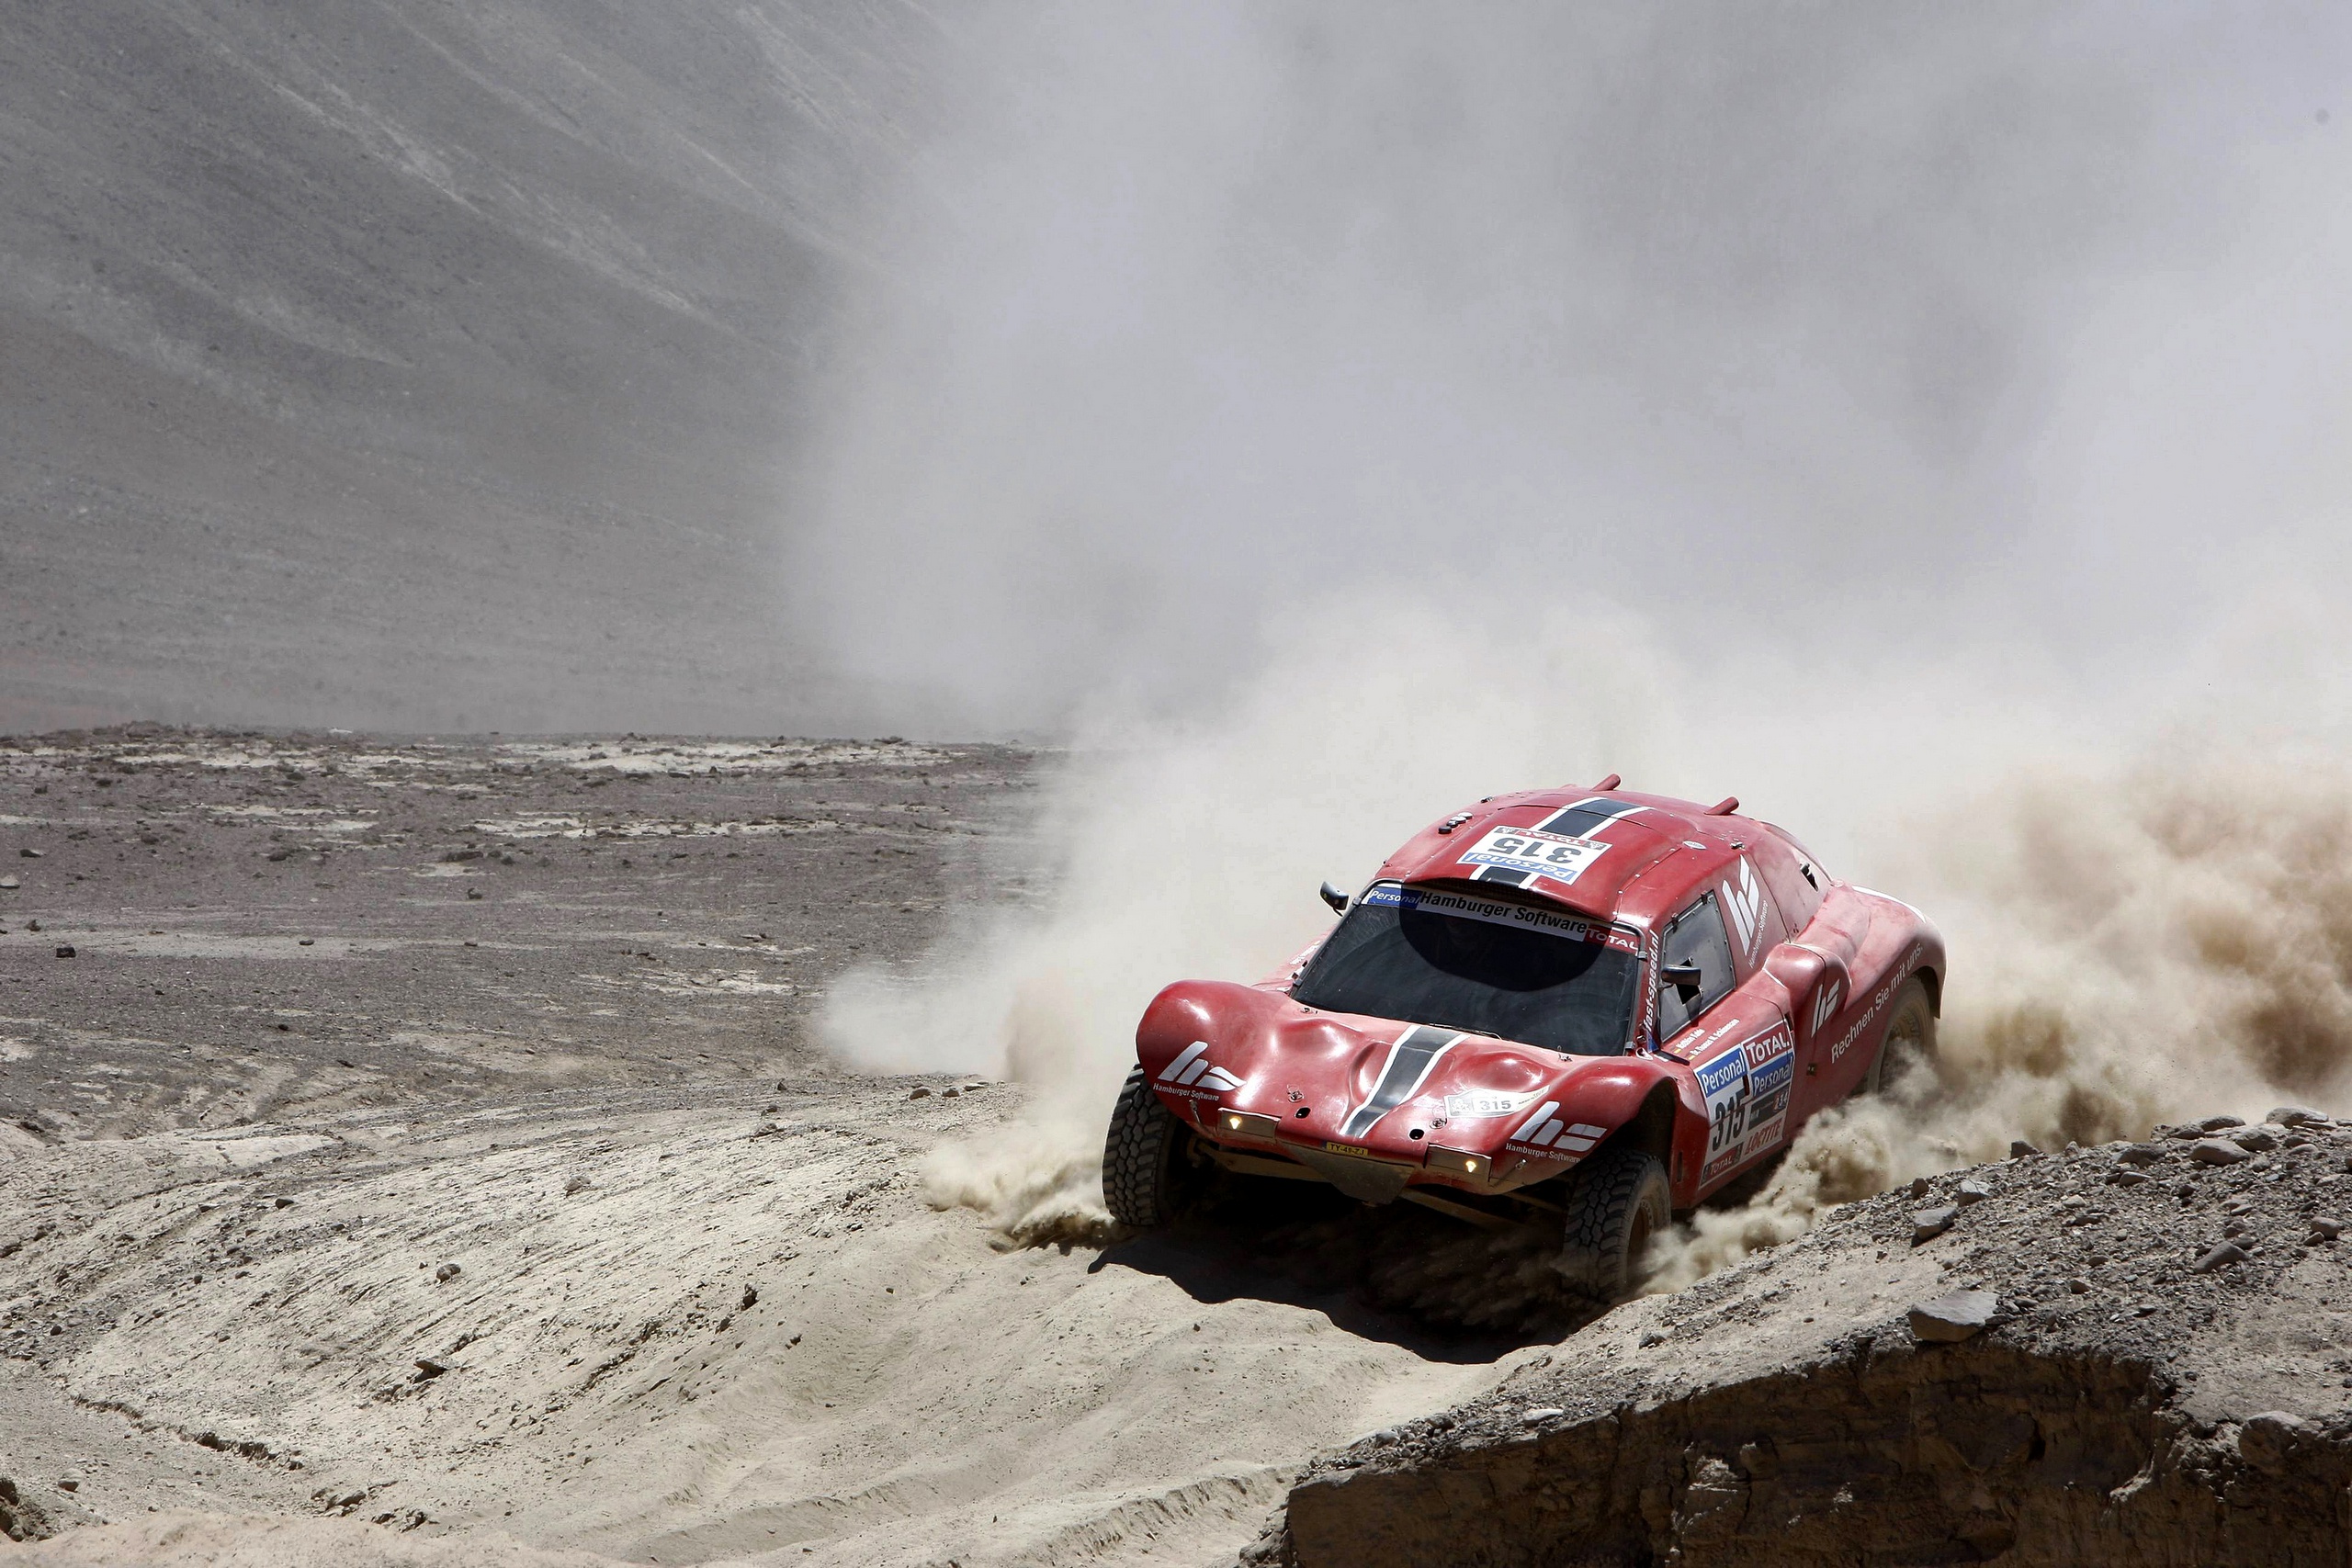 General 2560x1707 buggy racing Rally desert car vehicle dirt red cars livery